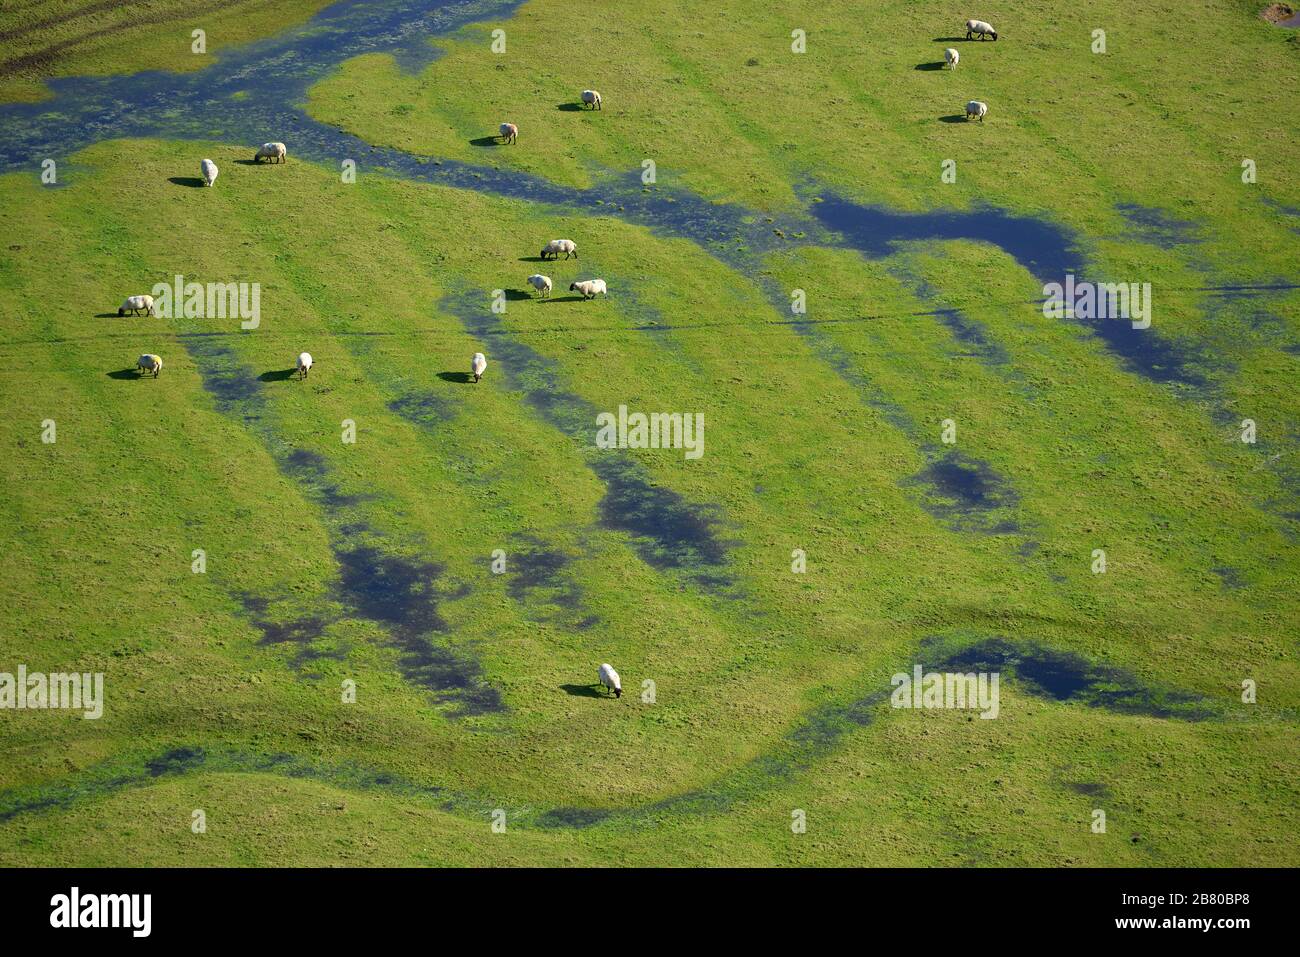 Sheep grazing on ancient ridge and furrow field systems. Cuckmere Valley, East Sussex Stock Photo